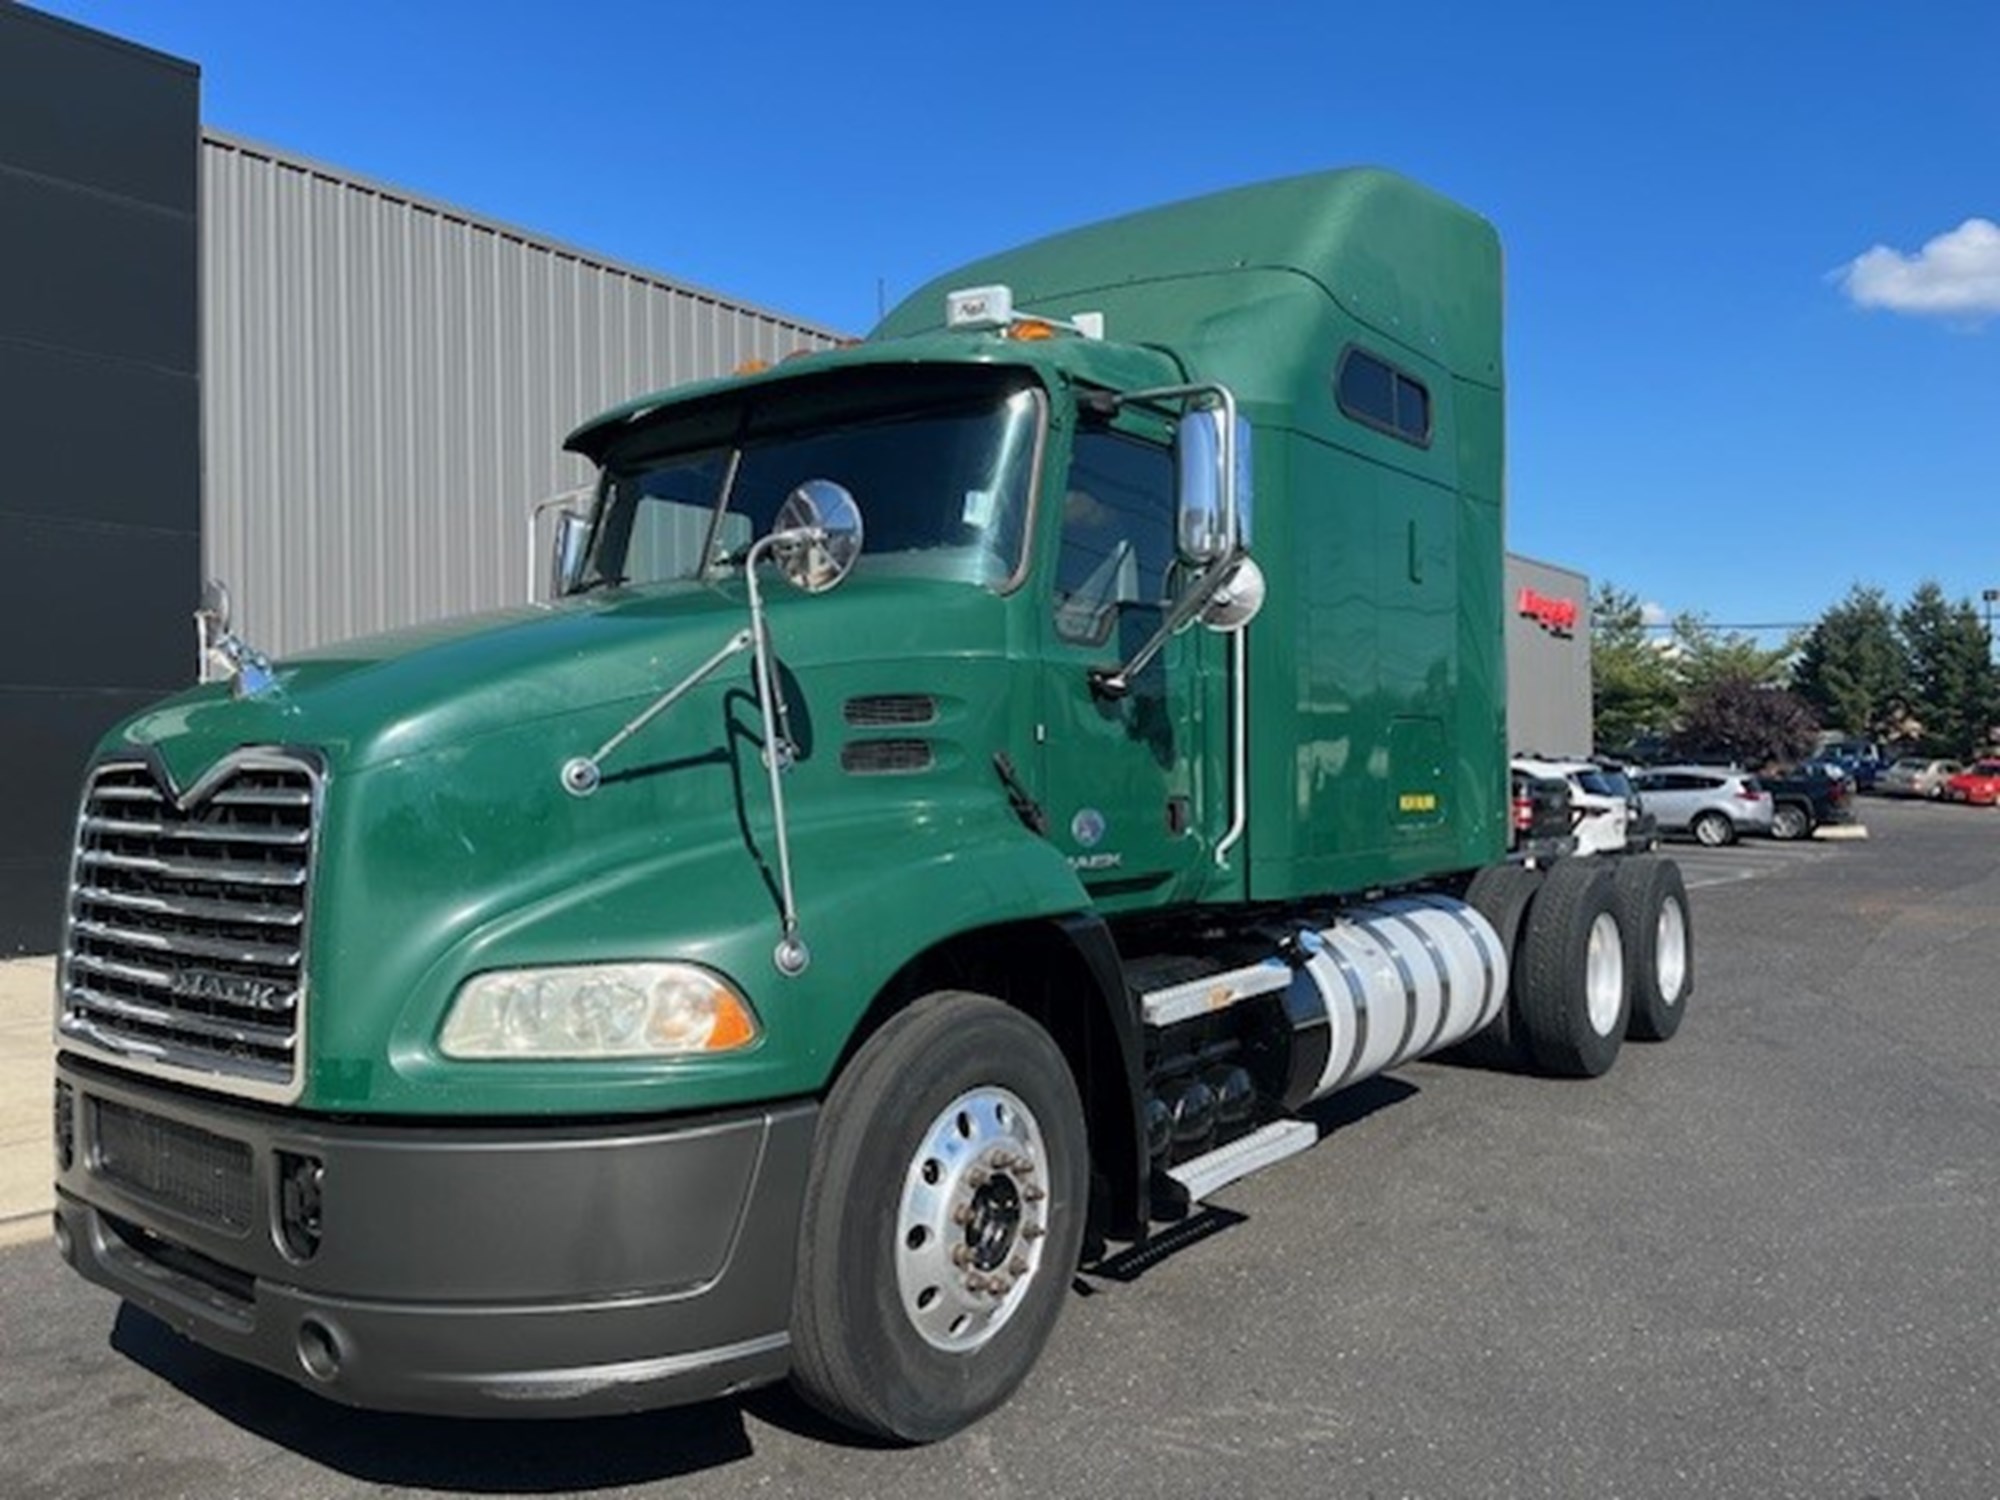 Used Truck Inventory - 1001434 01 - 70